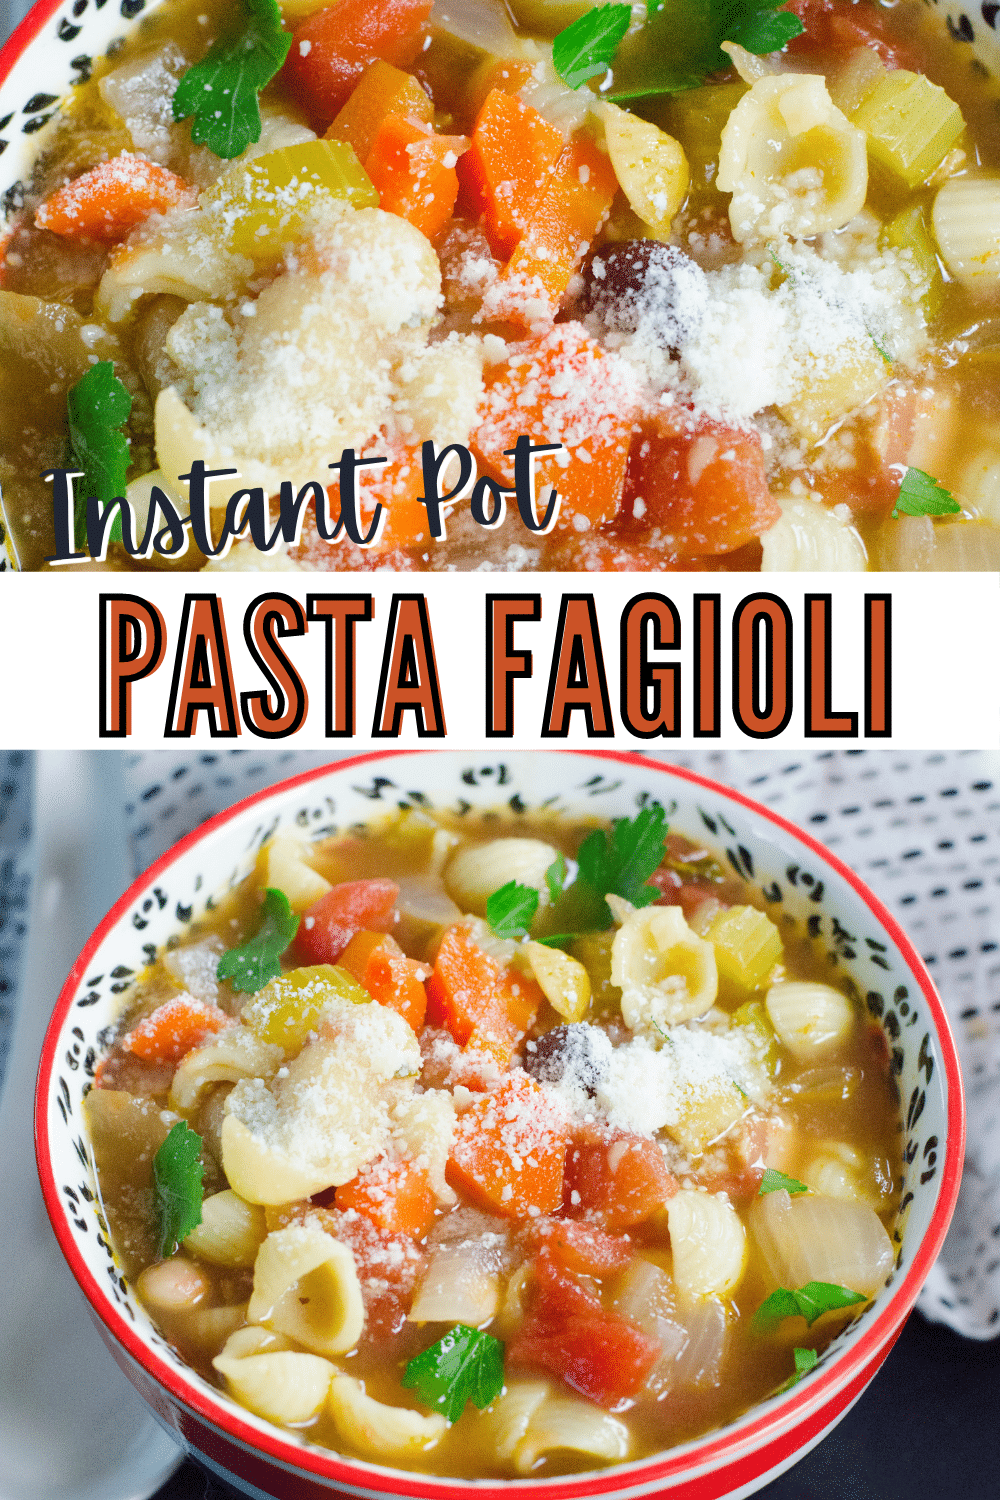 This Instant Pot Pasta Fagioli is perfect if you love Italian comfort food. It’s flavorful and easy and quick to make in the pressure cooker. #instantpot #pressurecooker #pastafagioli #pasta #recipe via @wondermomwannab